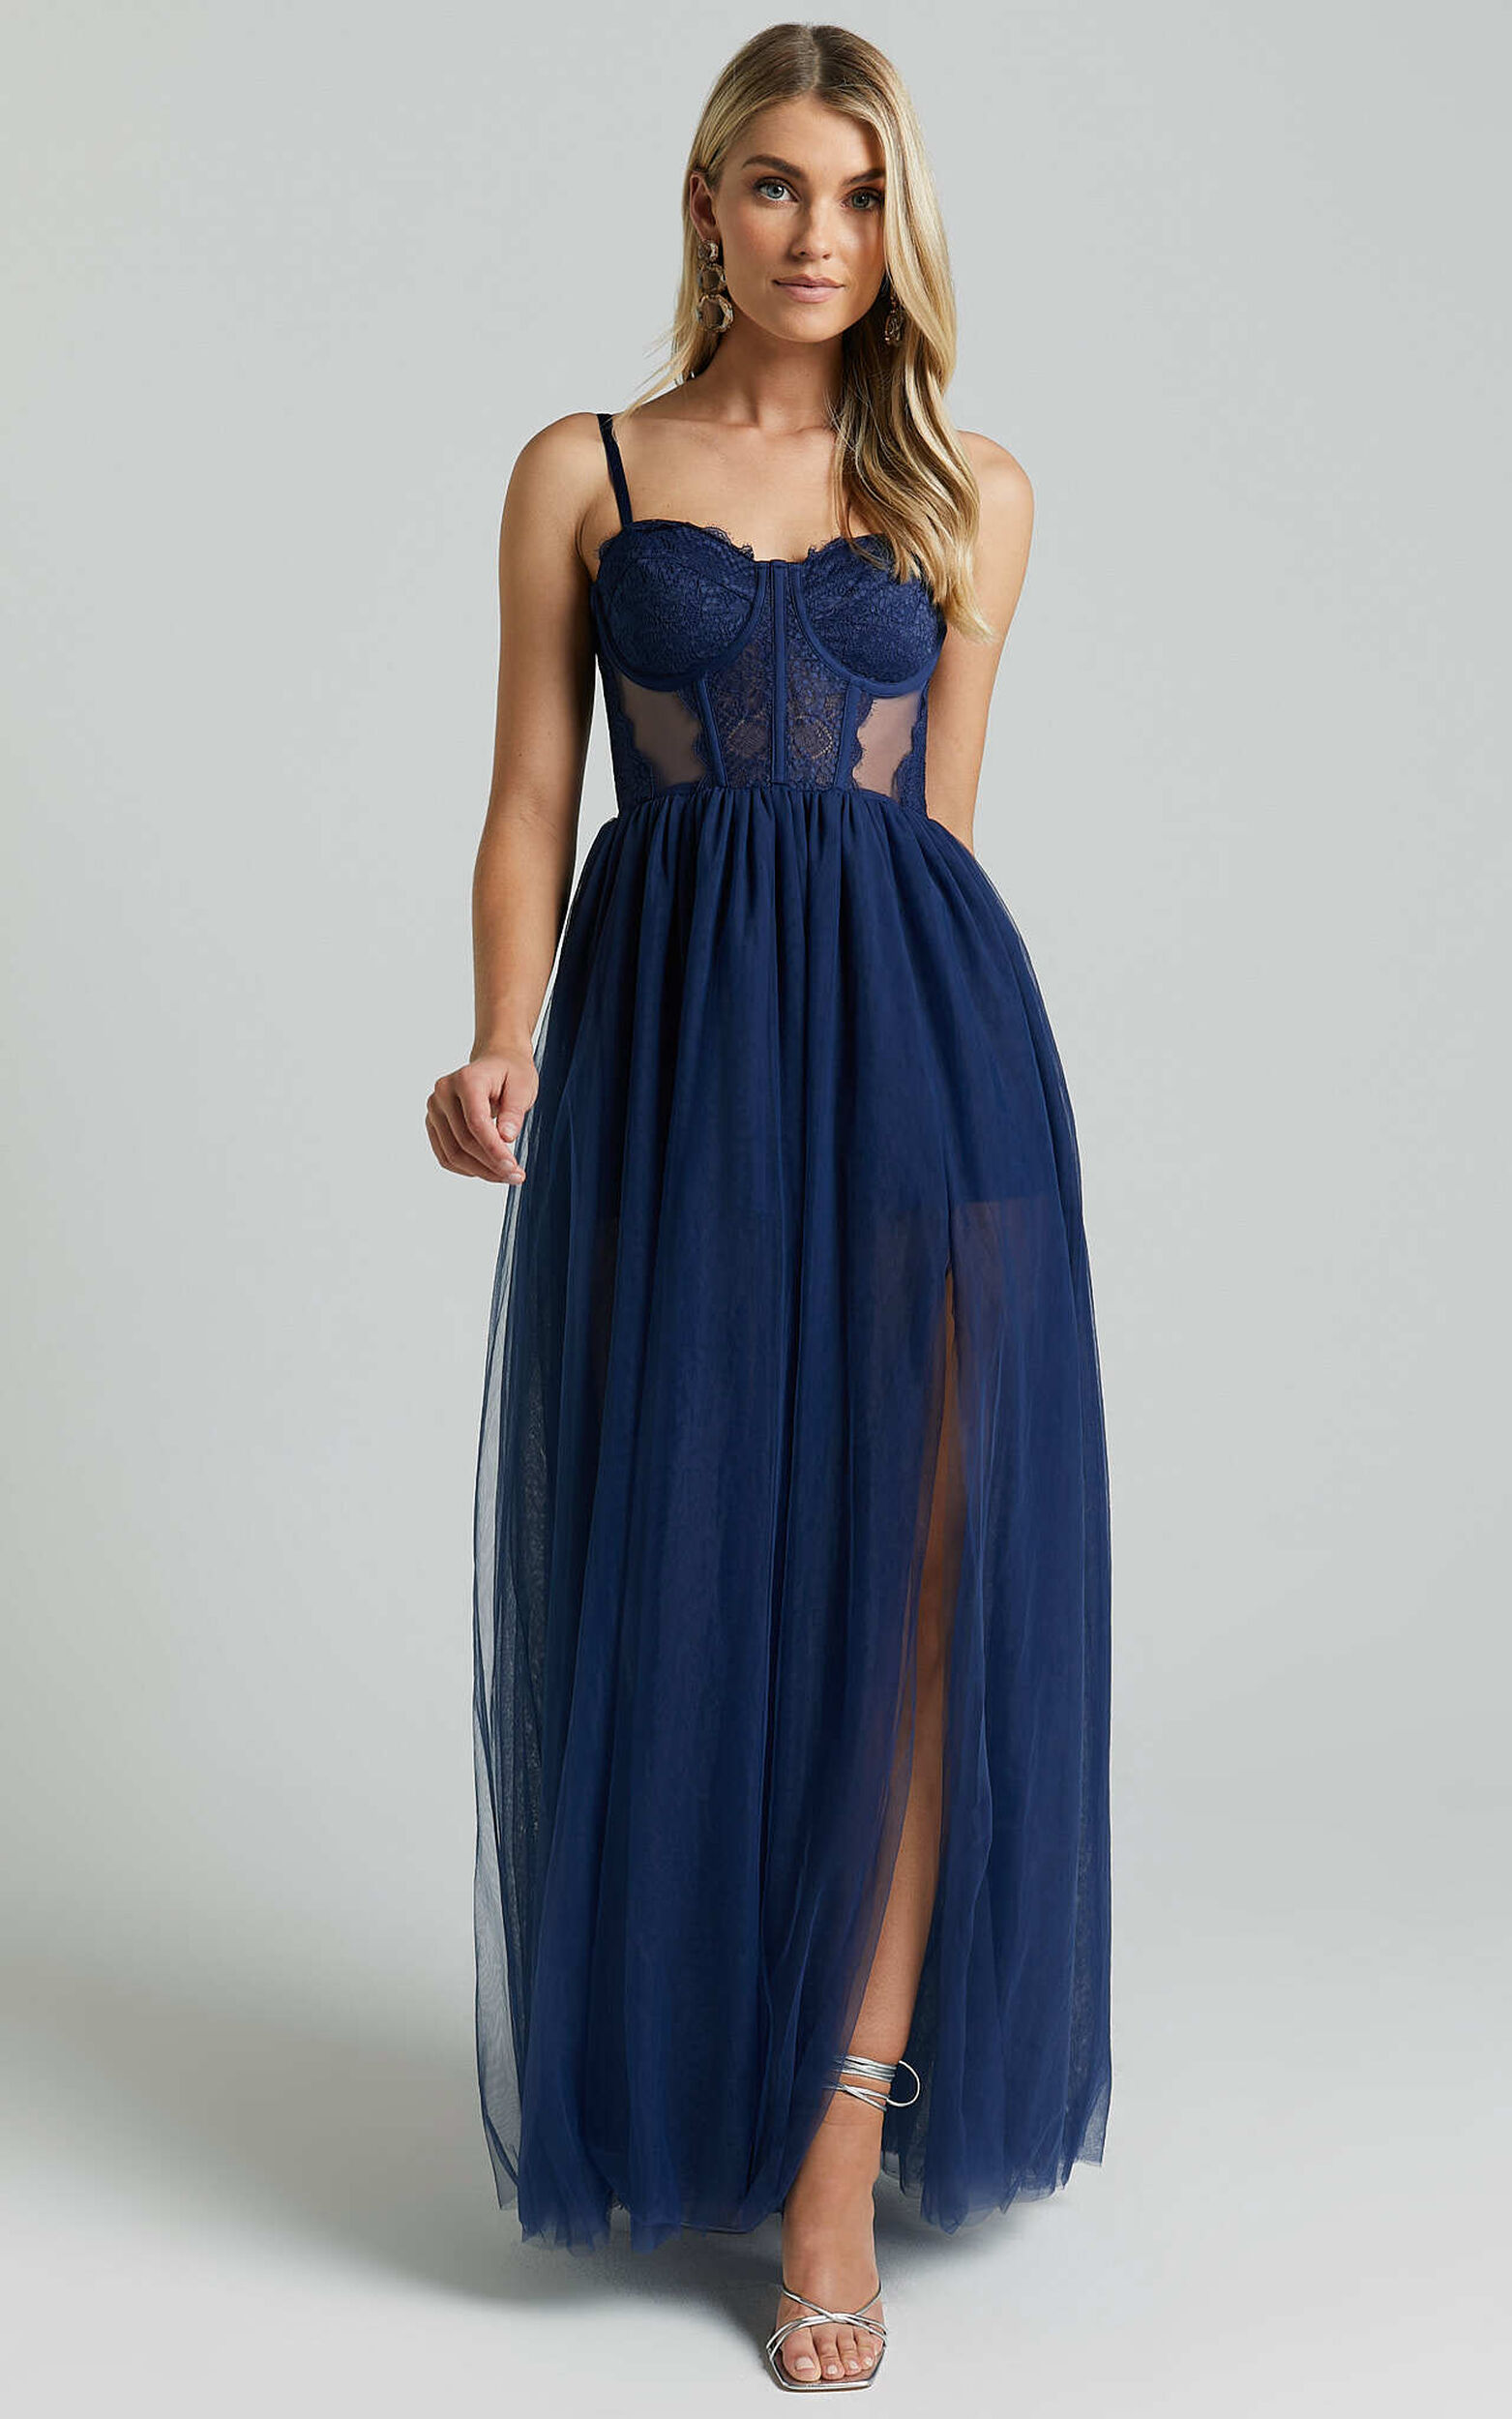 Audrie Midi Dress - Lace Corset Tulle Dress in Navy - 04, NVY1